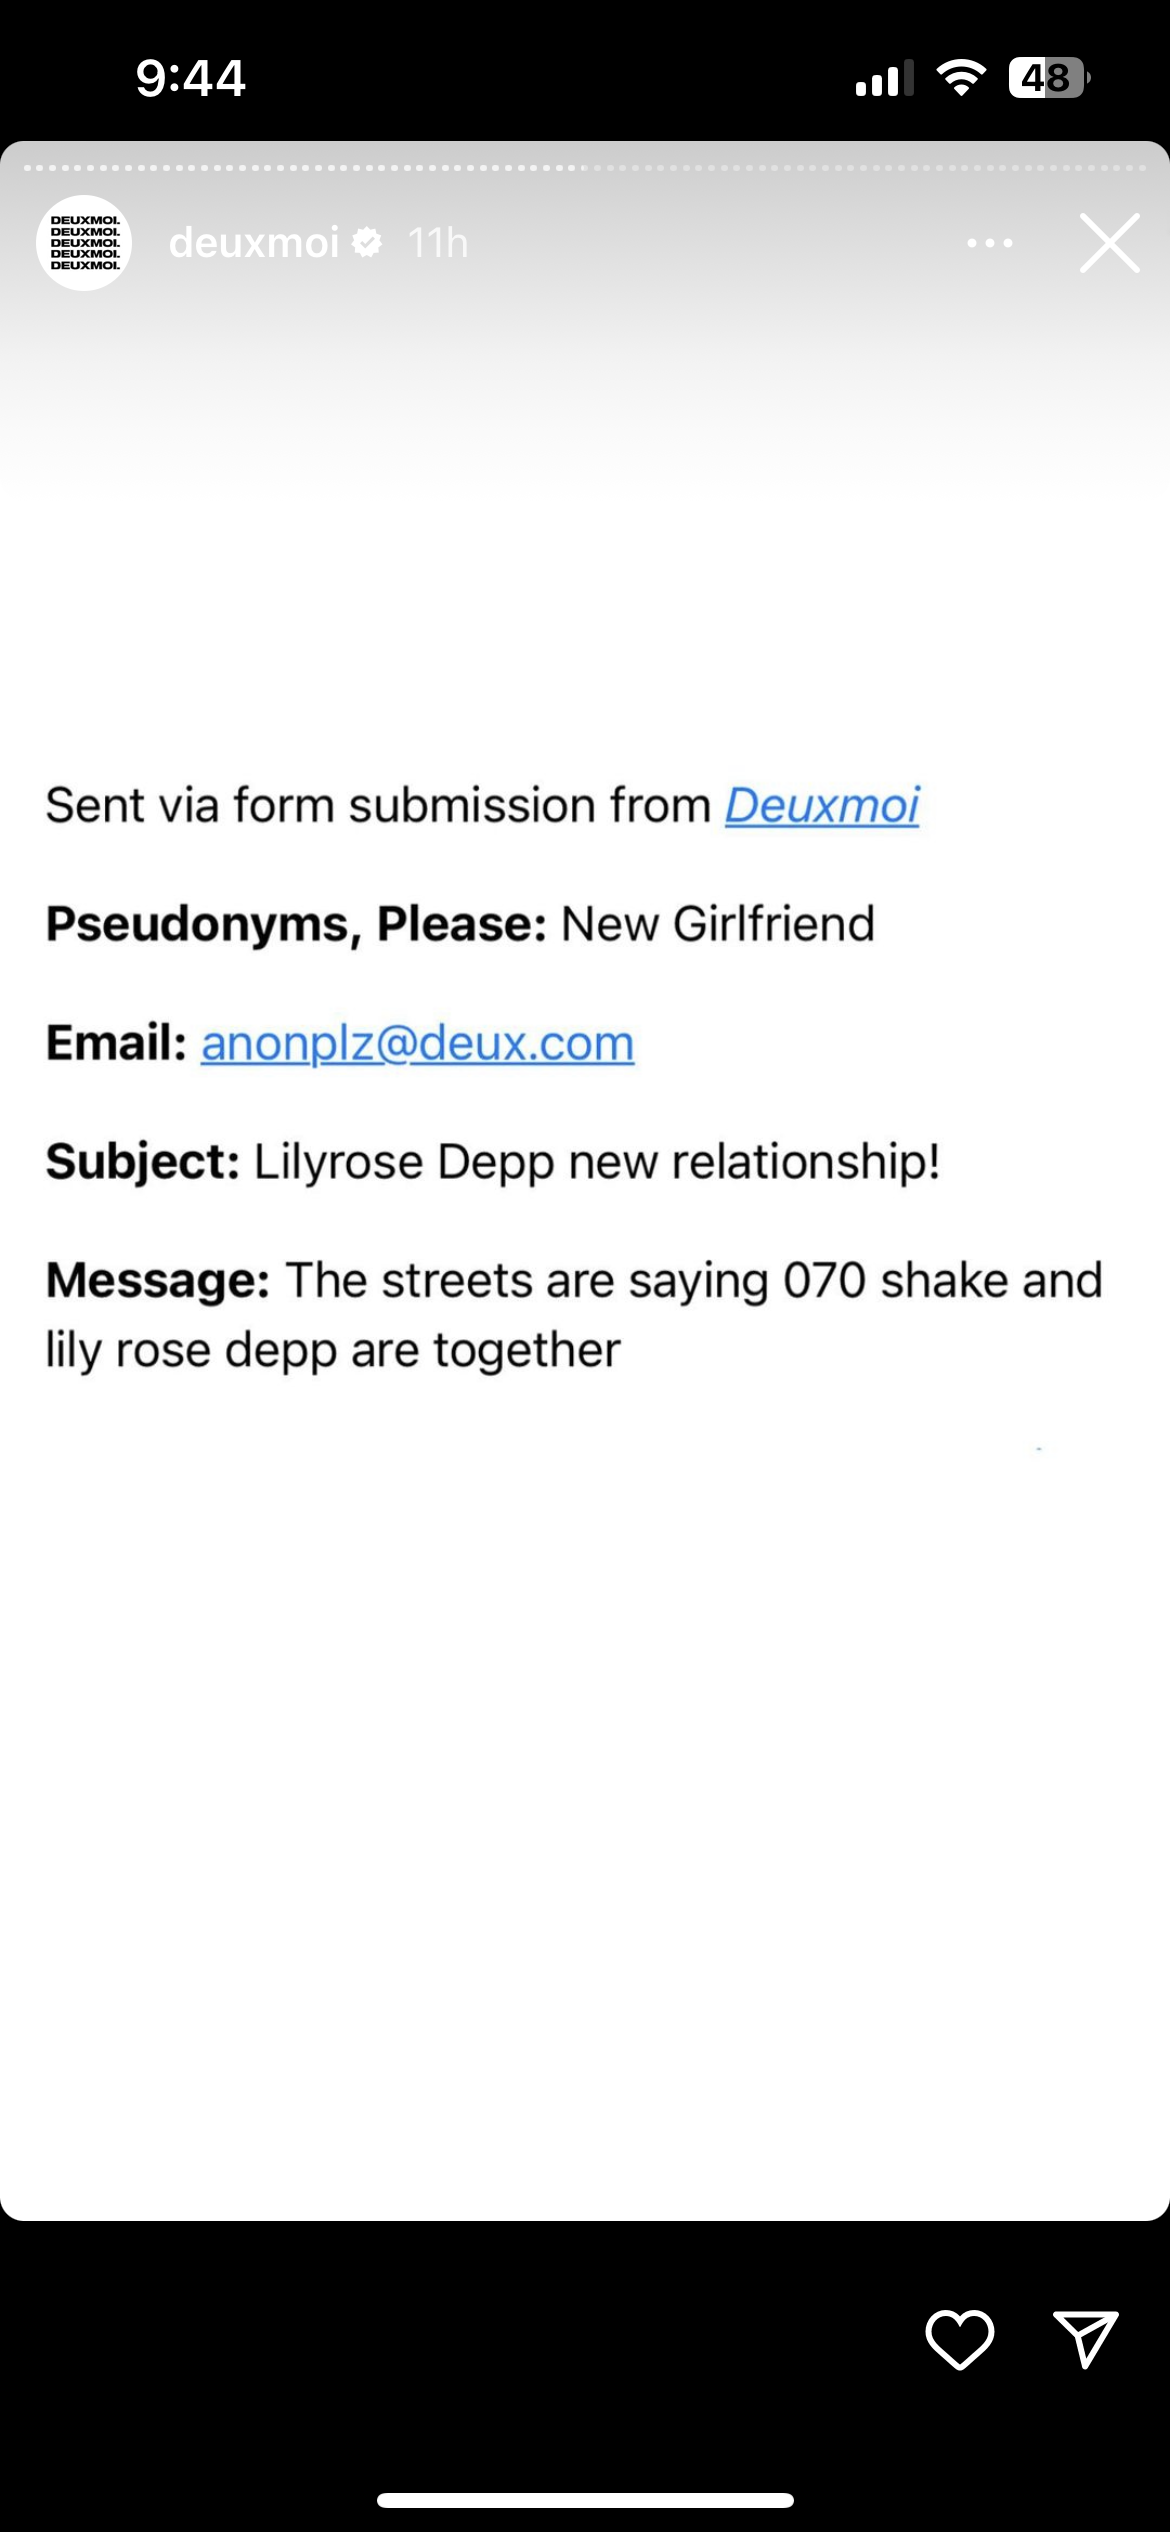 DeuxMoi reported that Lily-Rose Depp was dating 070 Shake.